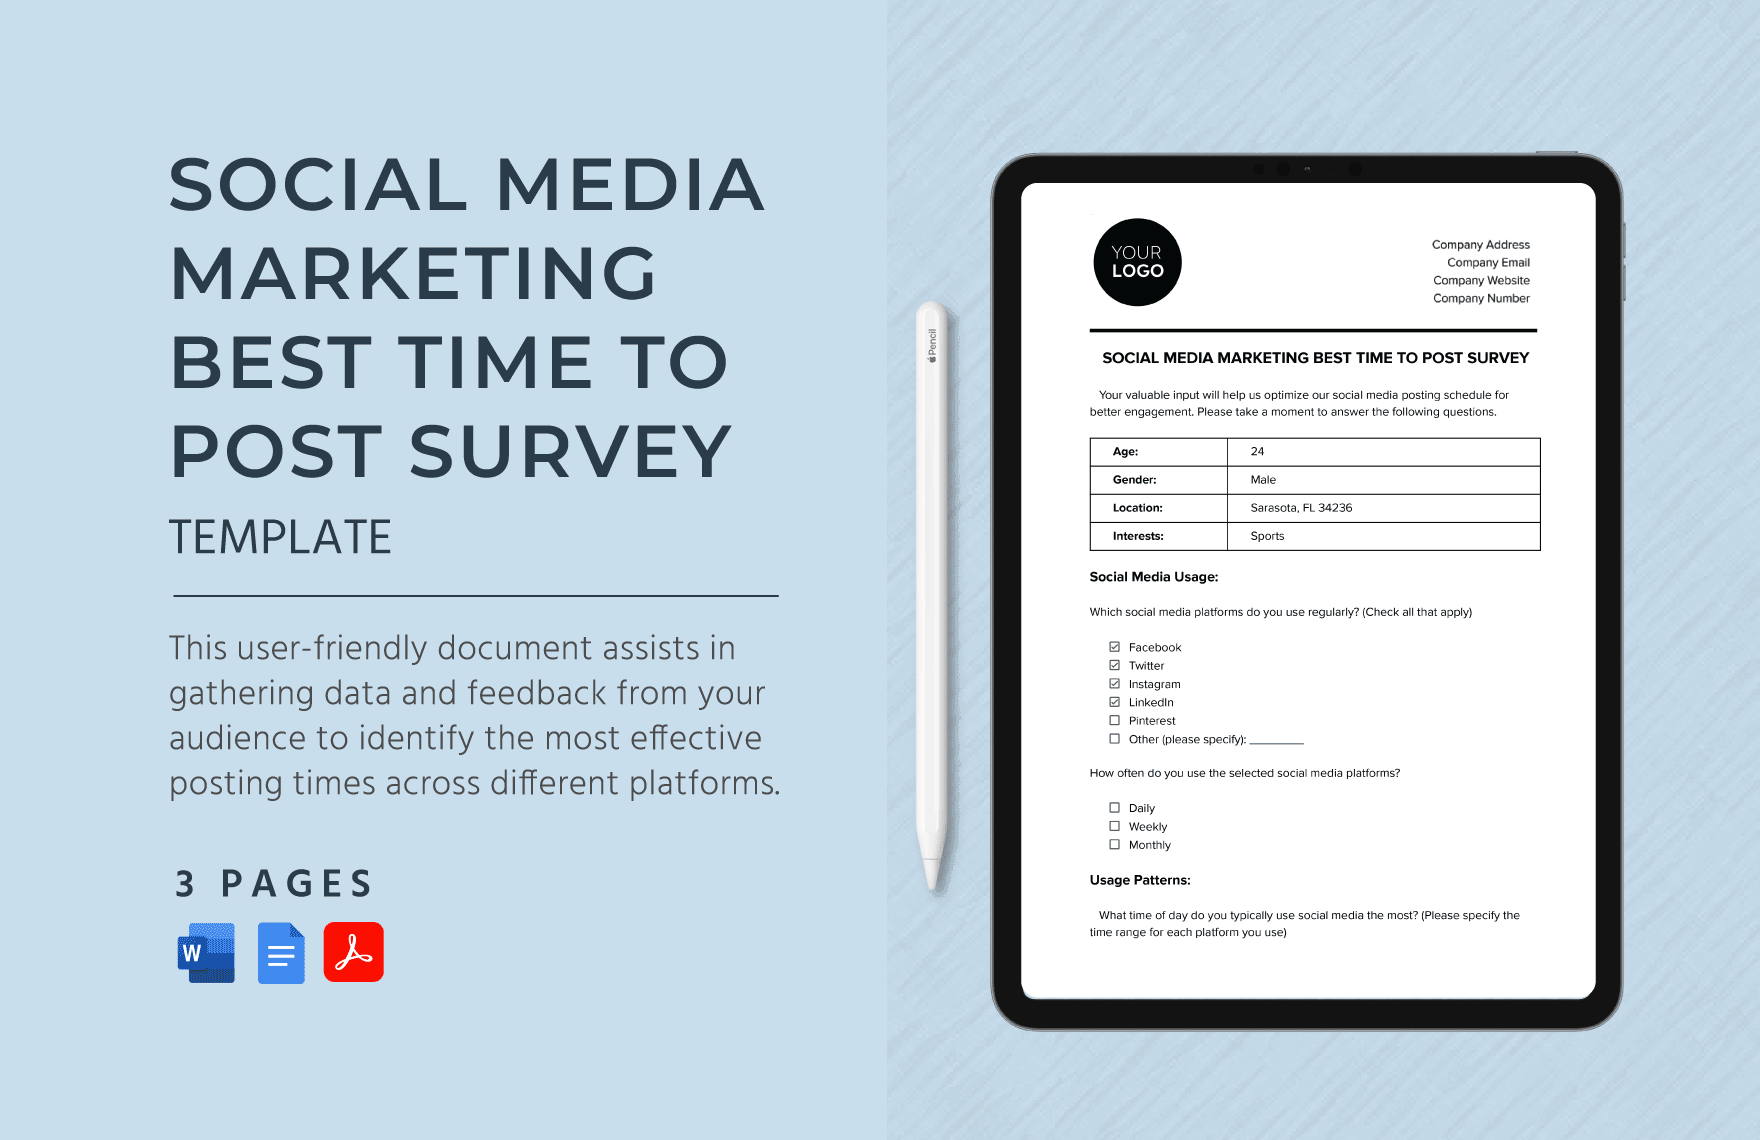 Social Media Marketing Best Time to Post Survey Template in Word, Google Docs, PDF